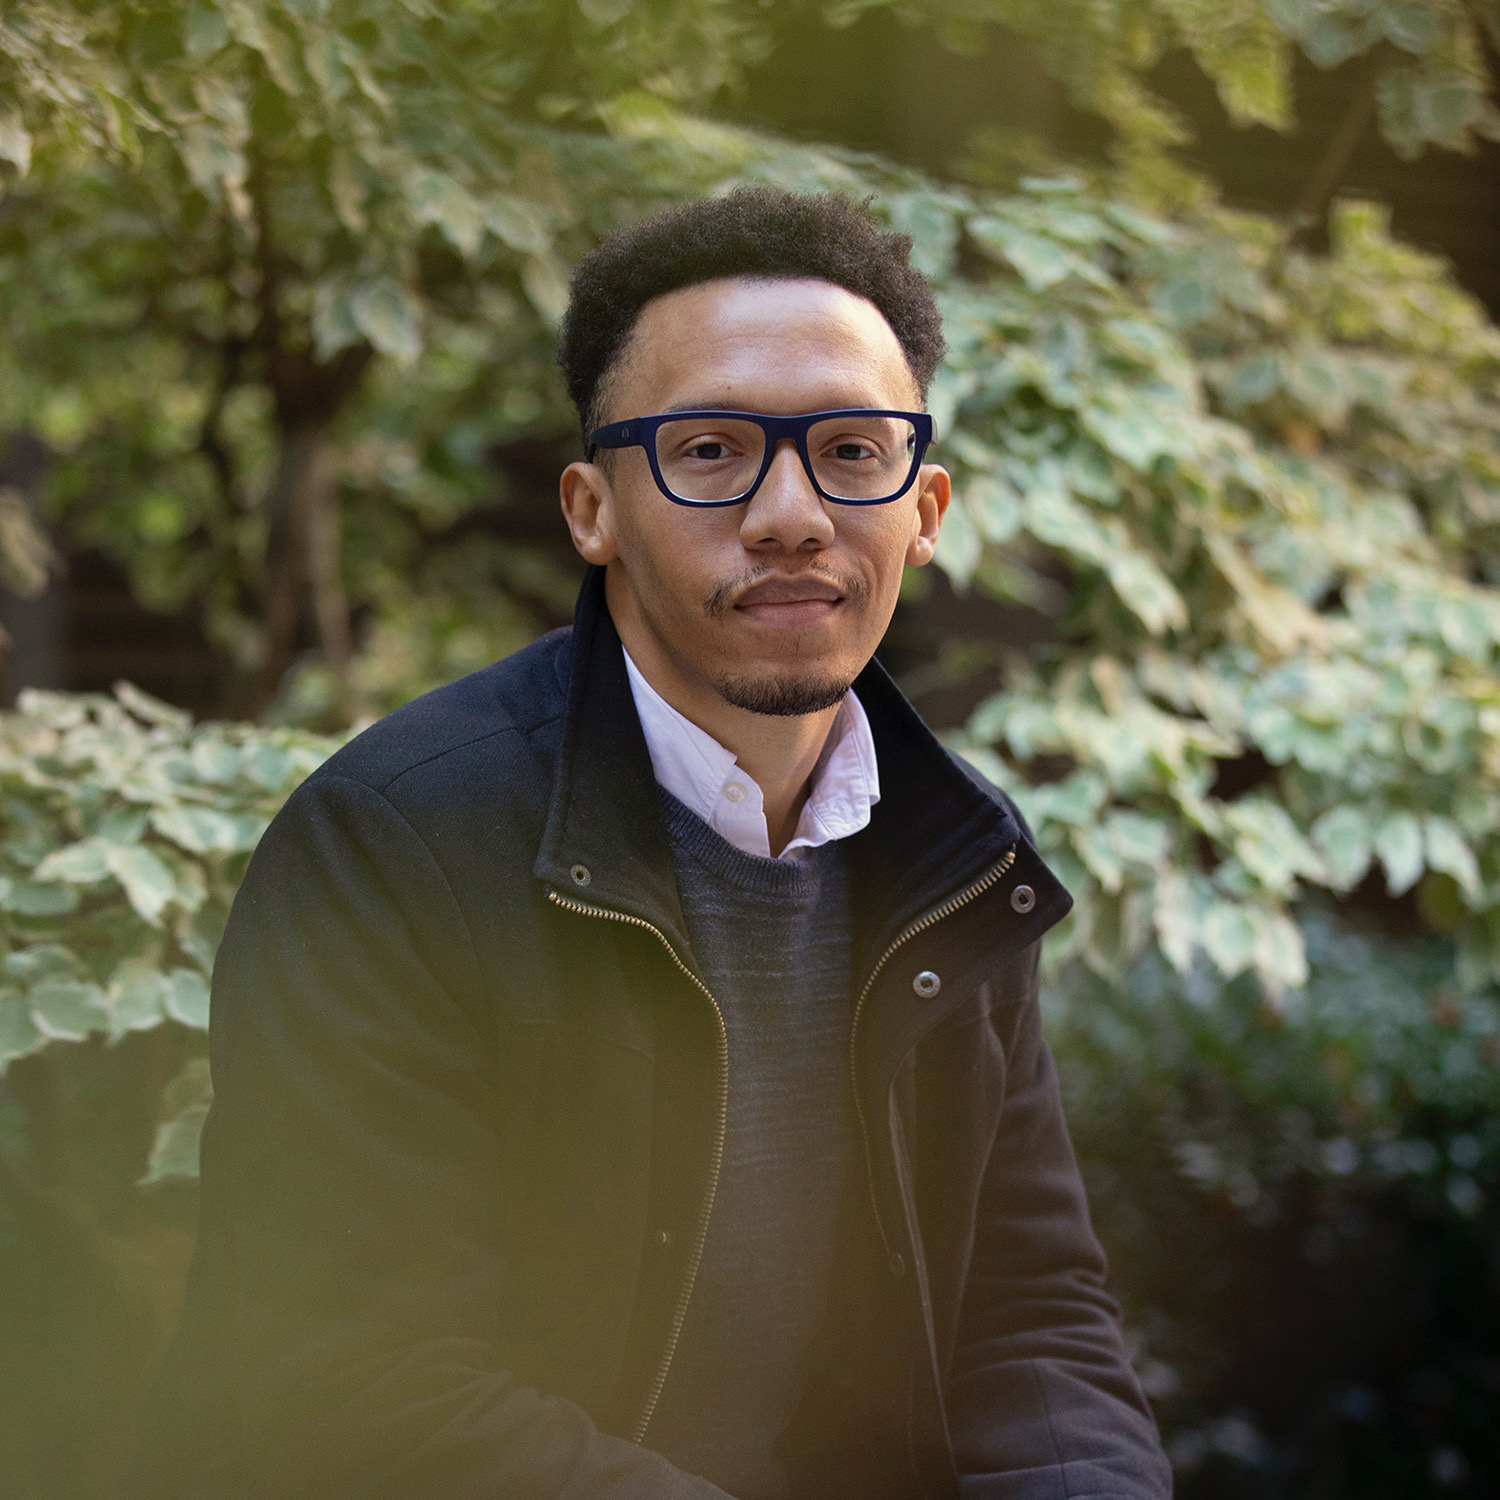 Sidney Wilkerson-Hill looking at the camera in glasses, a dark gray sweater over a light pink collared shirt with a dark overcoat in front of green foliage. A faint green blur is in front of his torso.